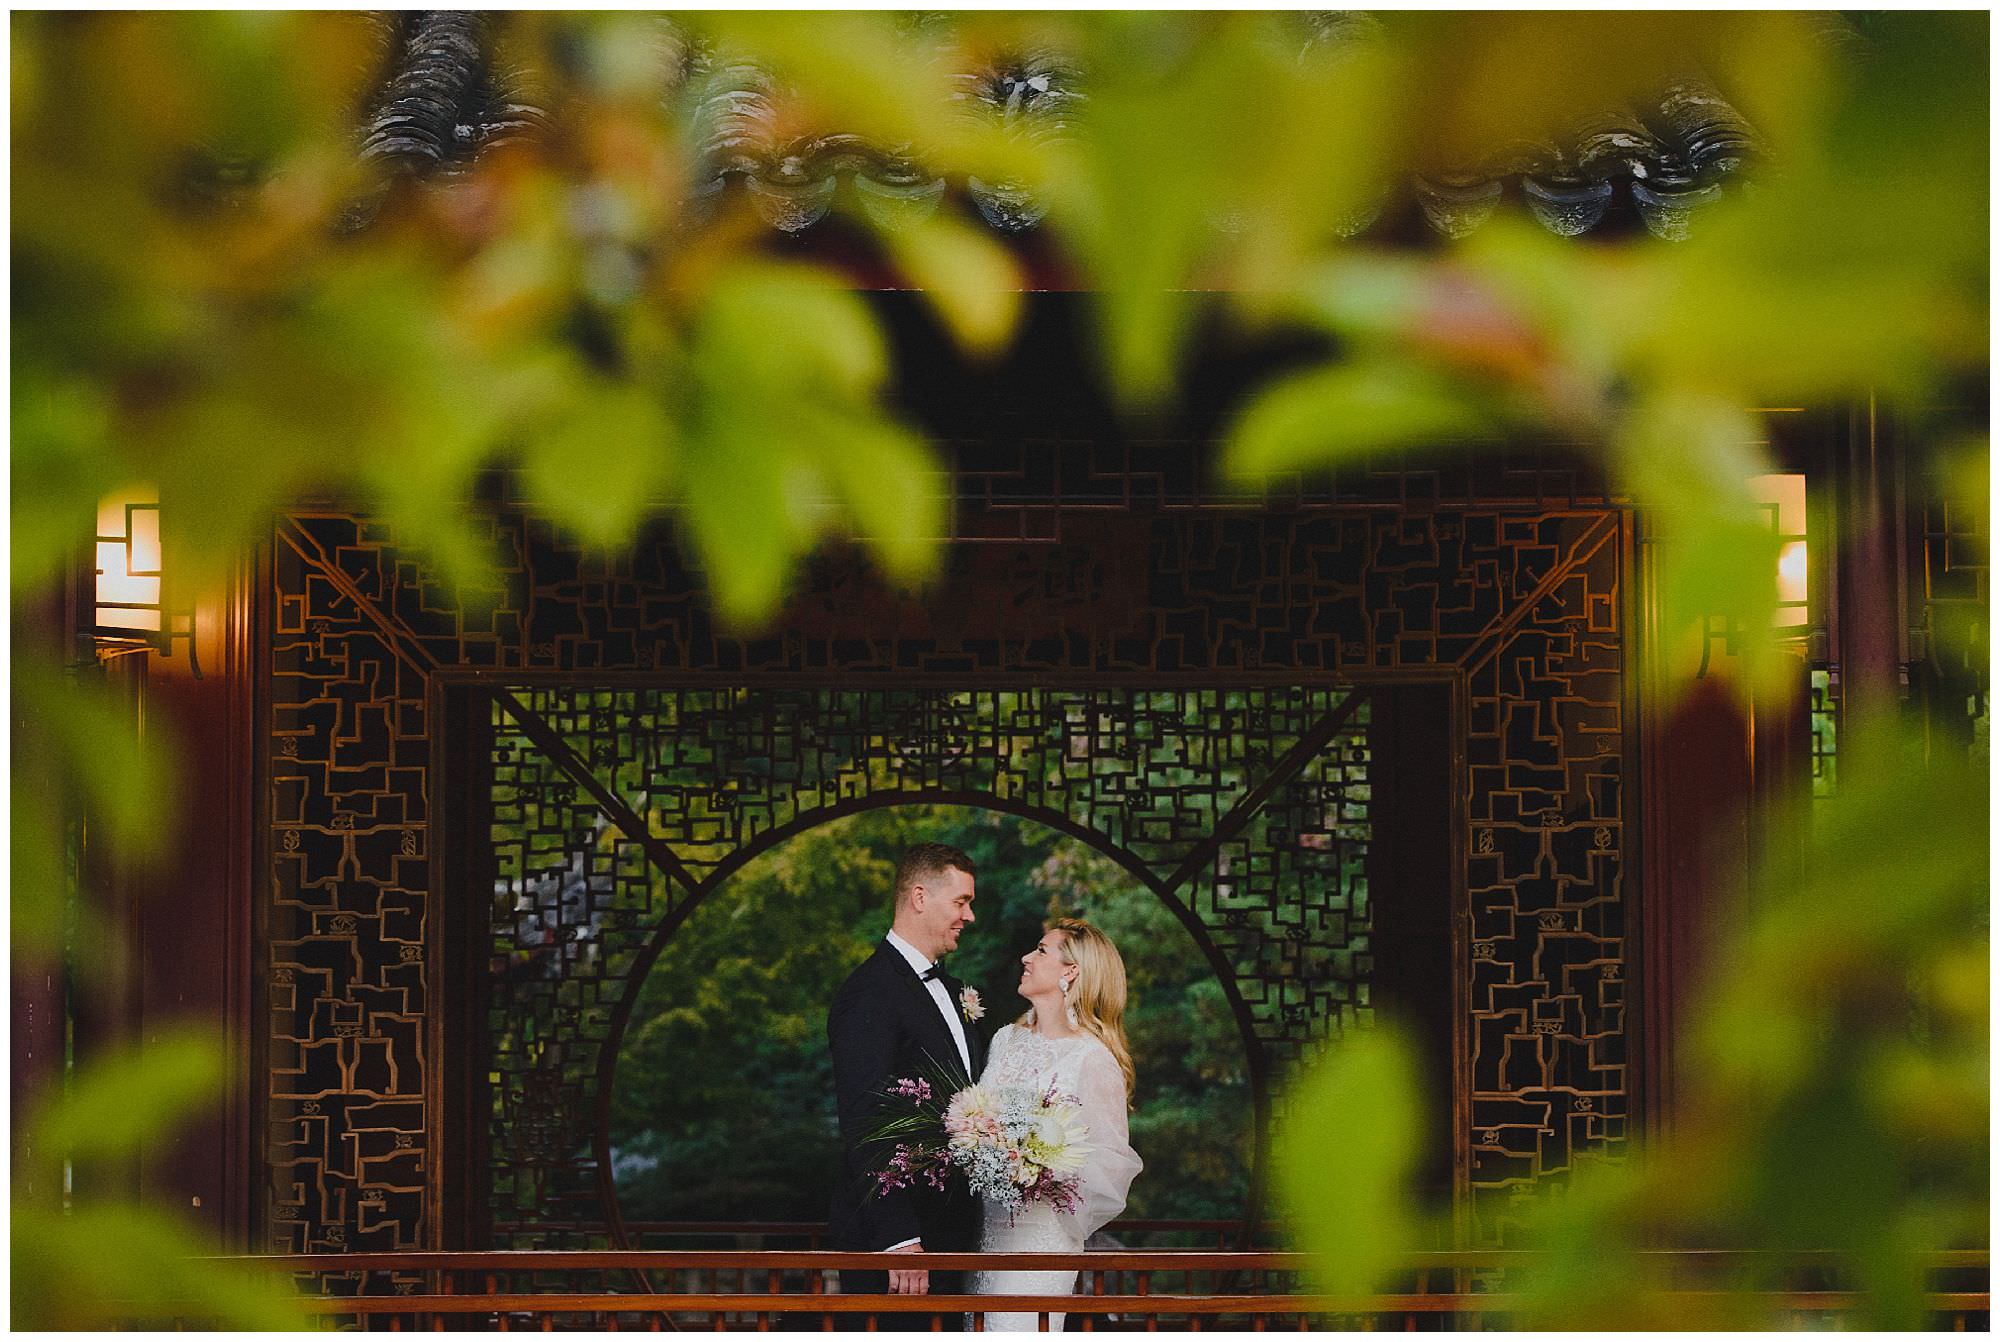 Bride and Groom laughing at sunset after their wedding ceremony at Dr. Sun Yat-Sen Classical Chinese Gardens, elopement, intimate wedding, candid wedding photography